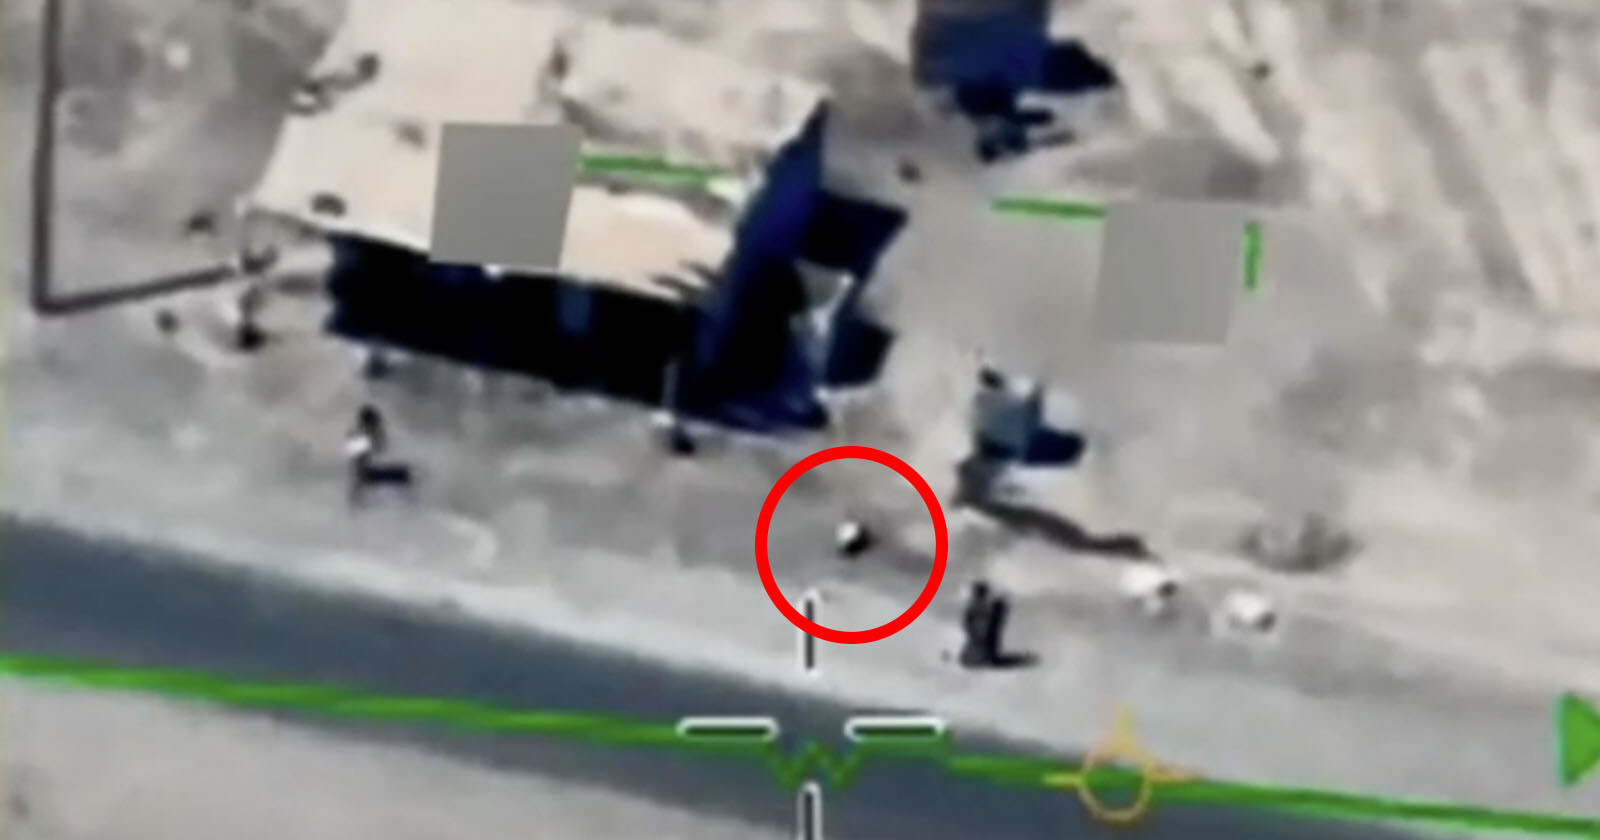 Pentagon Releases Incredible New Footage of a UAP